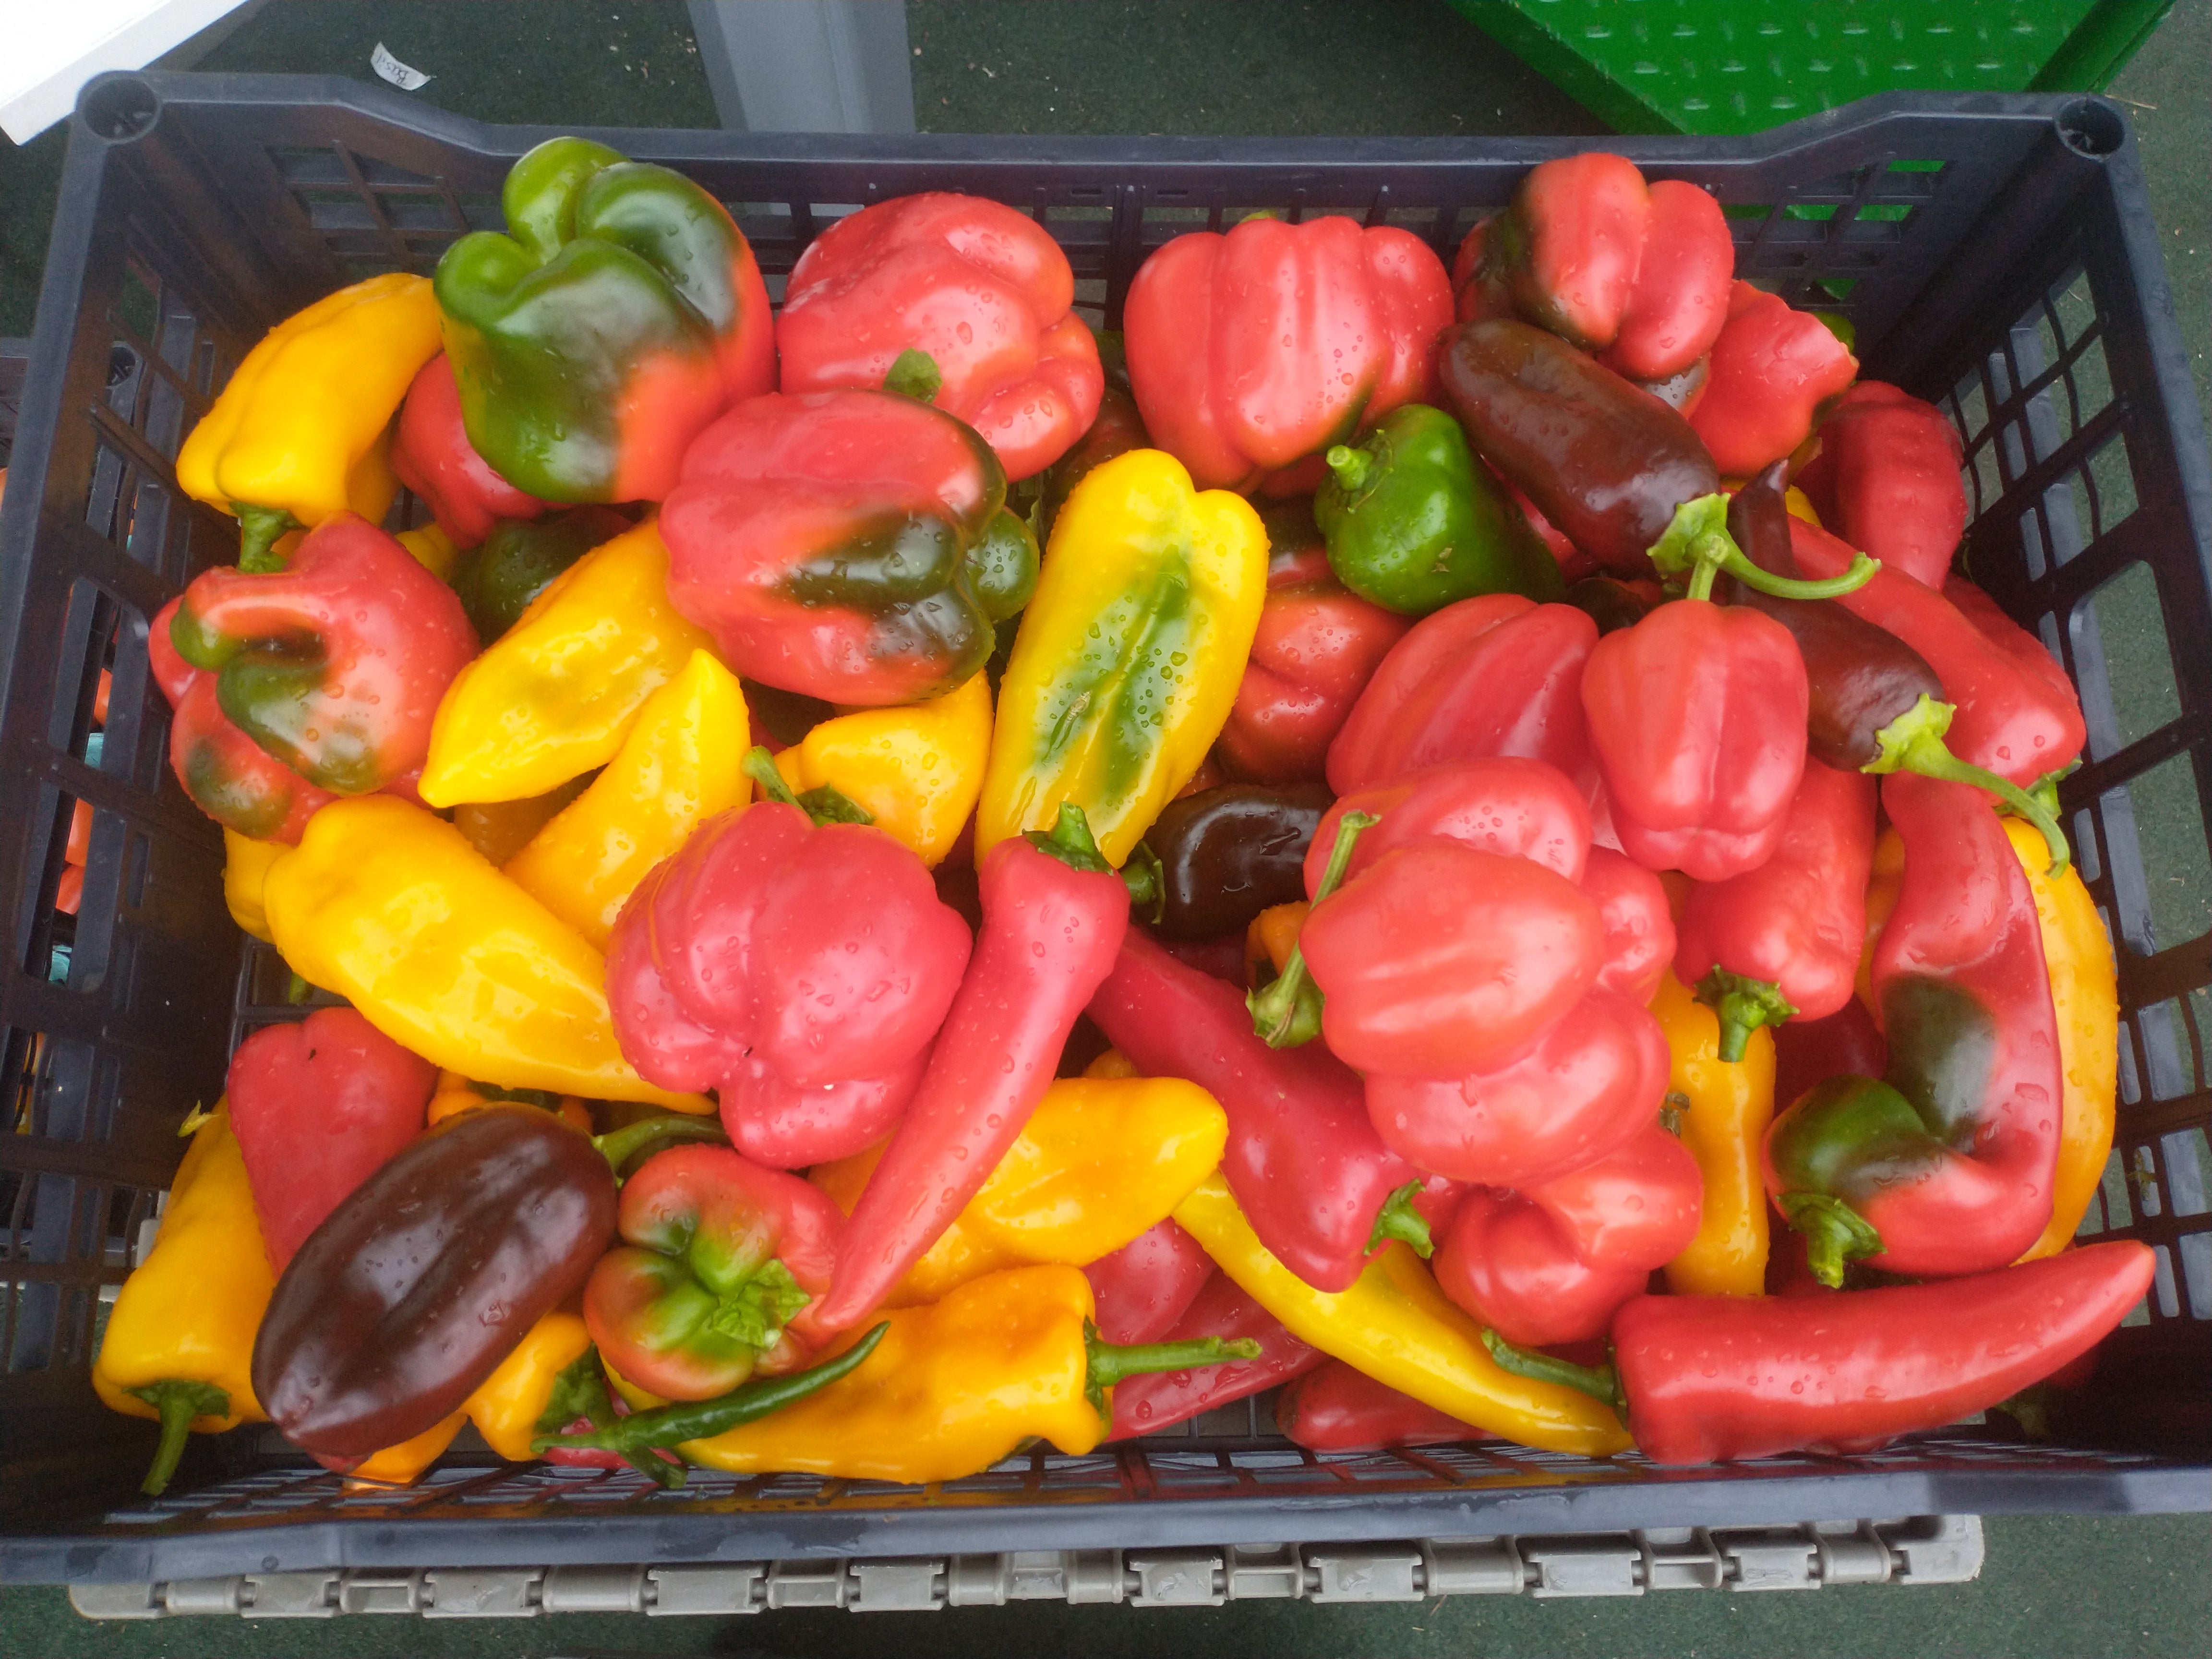 Crate of peppers